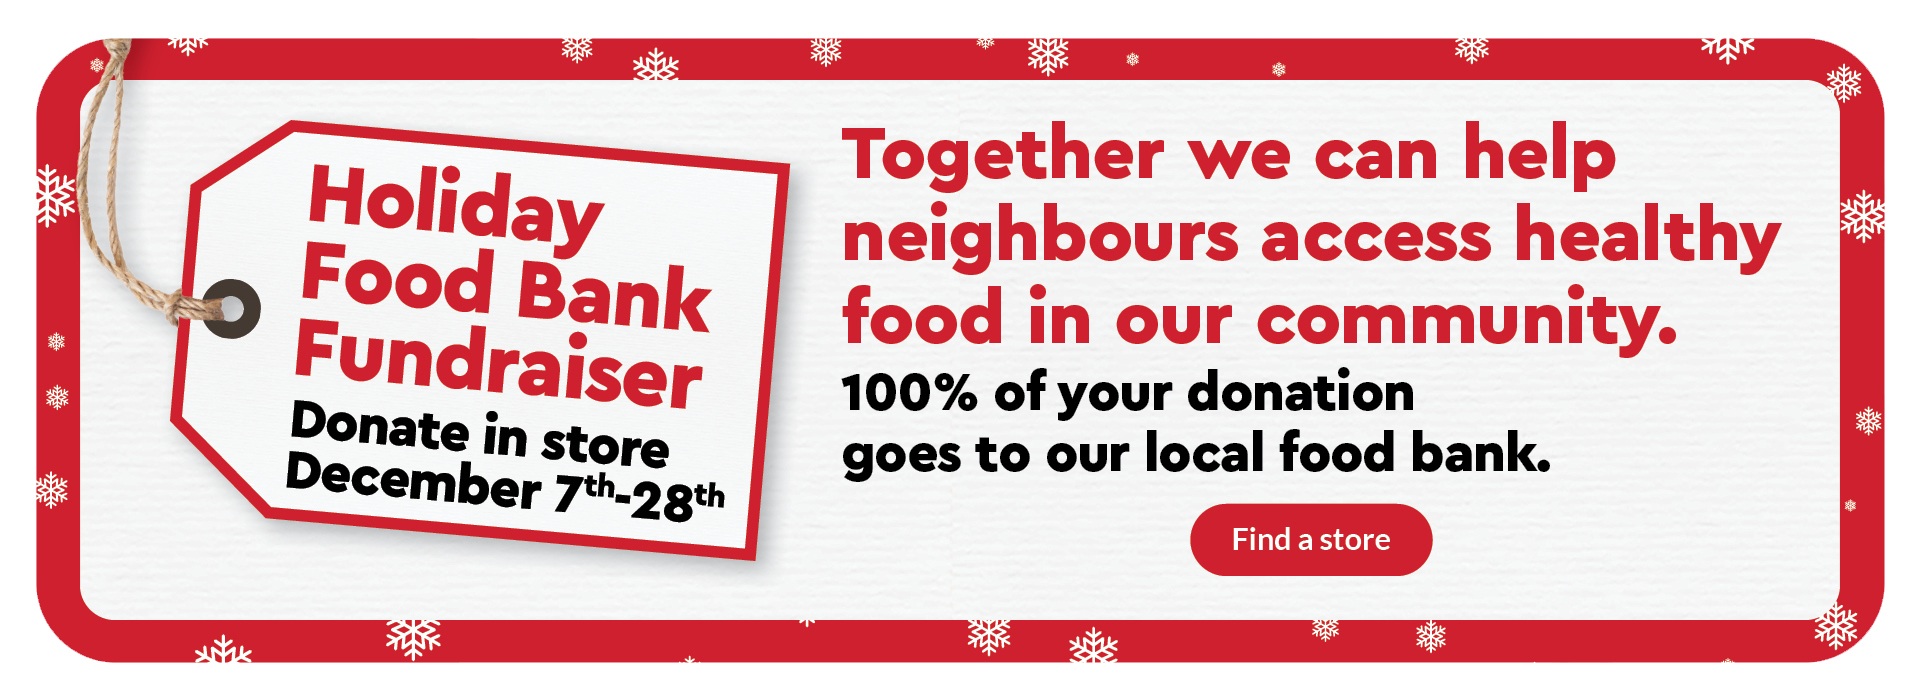 Holiday Food Bank Fundraiser; Donate in store Dec. 7th-28th. Together we can help neighbours access healthy food in our community. 100% of your donation goes to our local food bank.